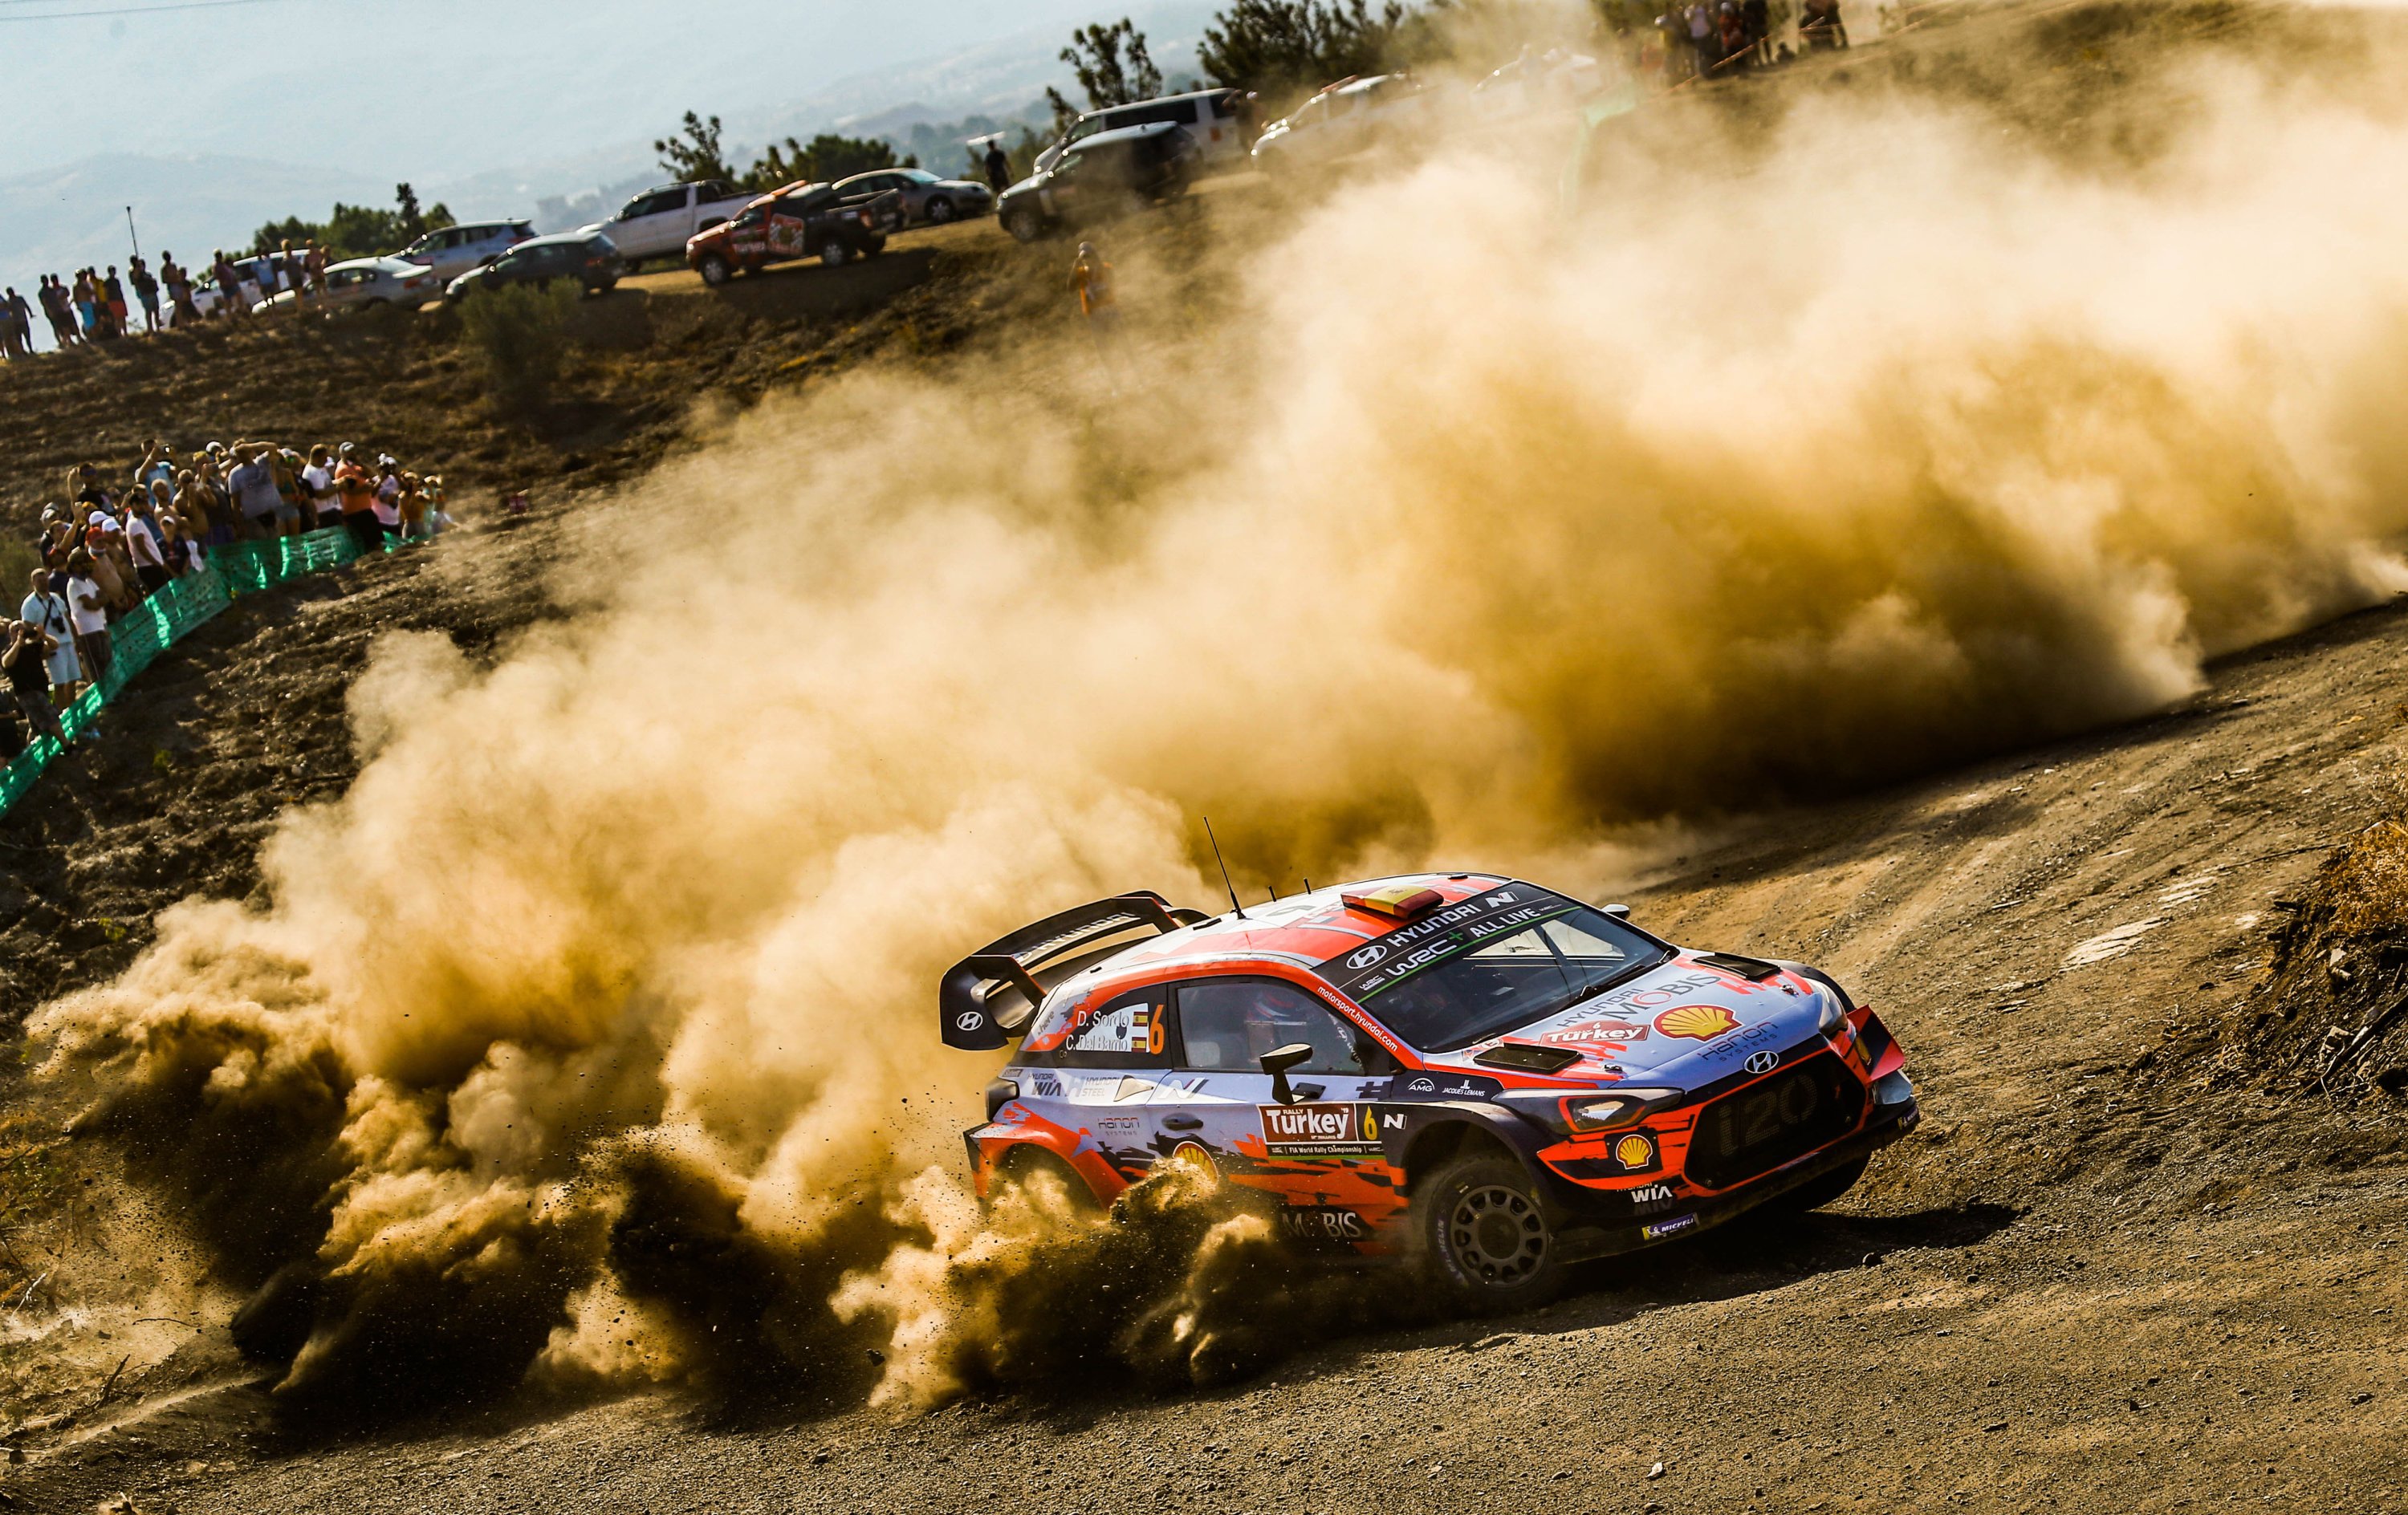 World Rally Championship planning to return in September | Daily Sabah